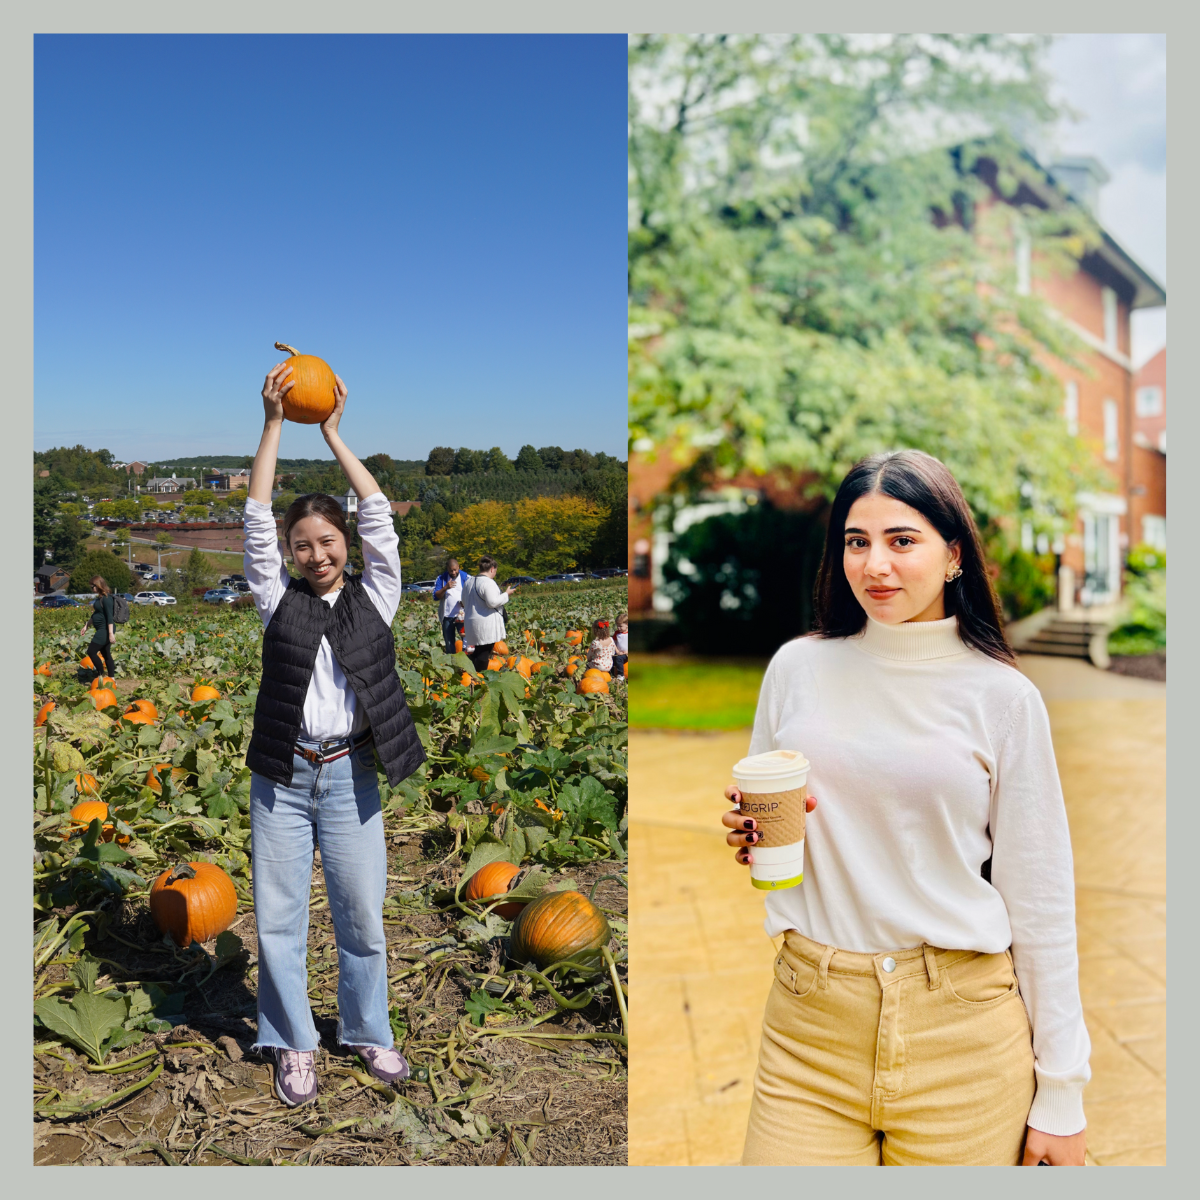 Two photos side by side, a young woman holding a pumpkin in a field and another young woman holding a coffee cup on Shadyside Campus